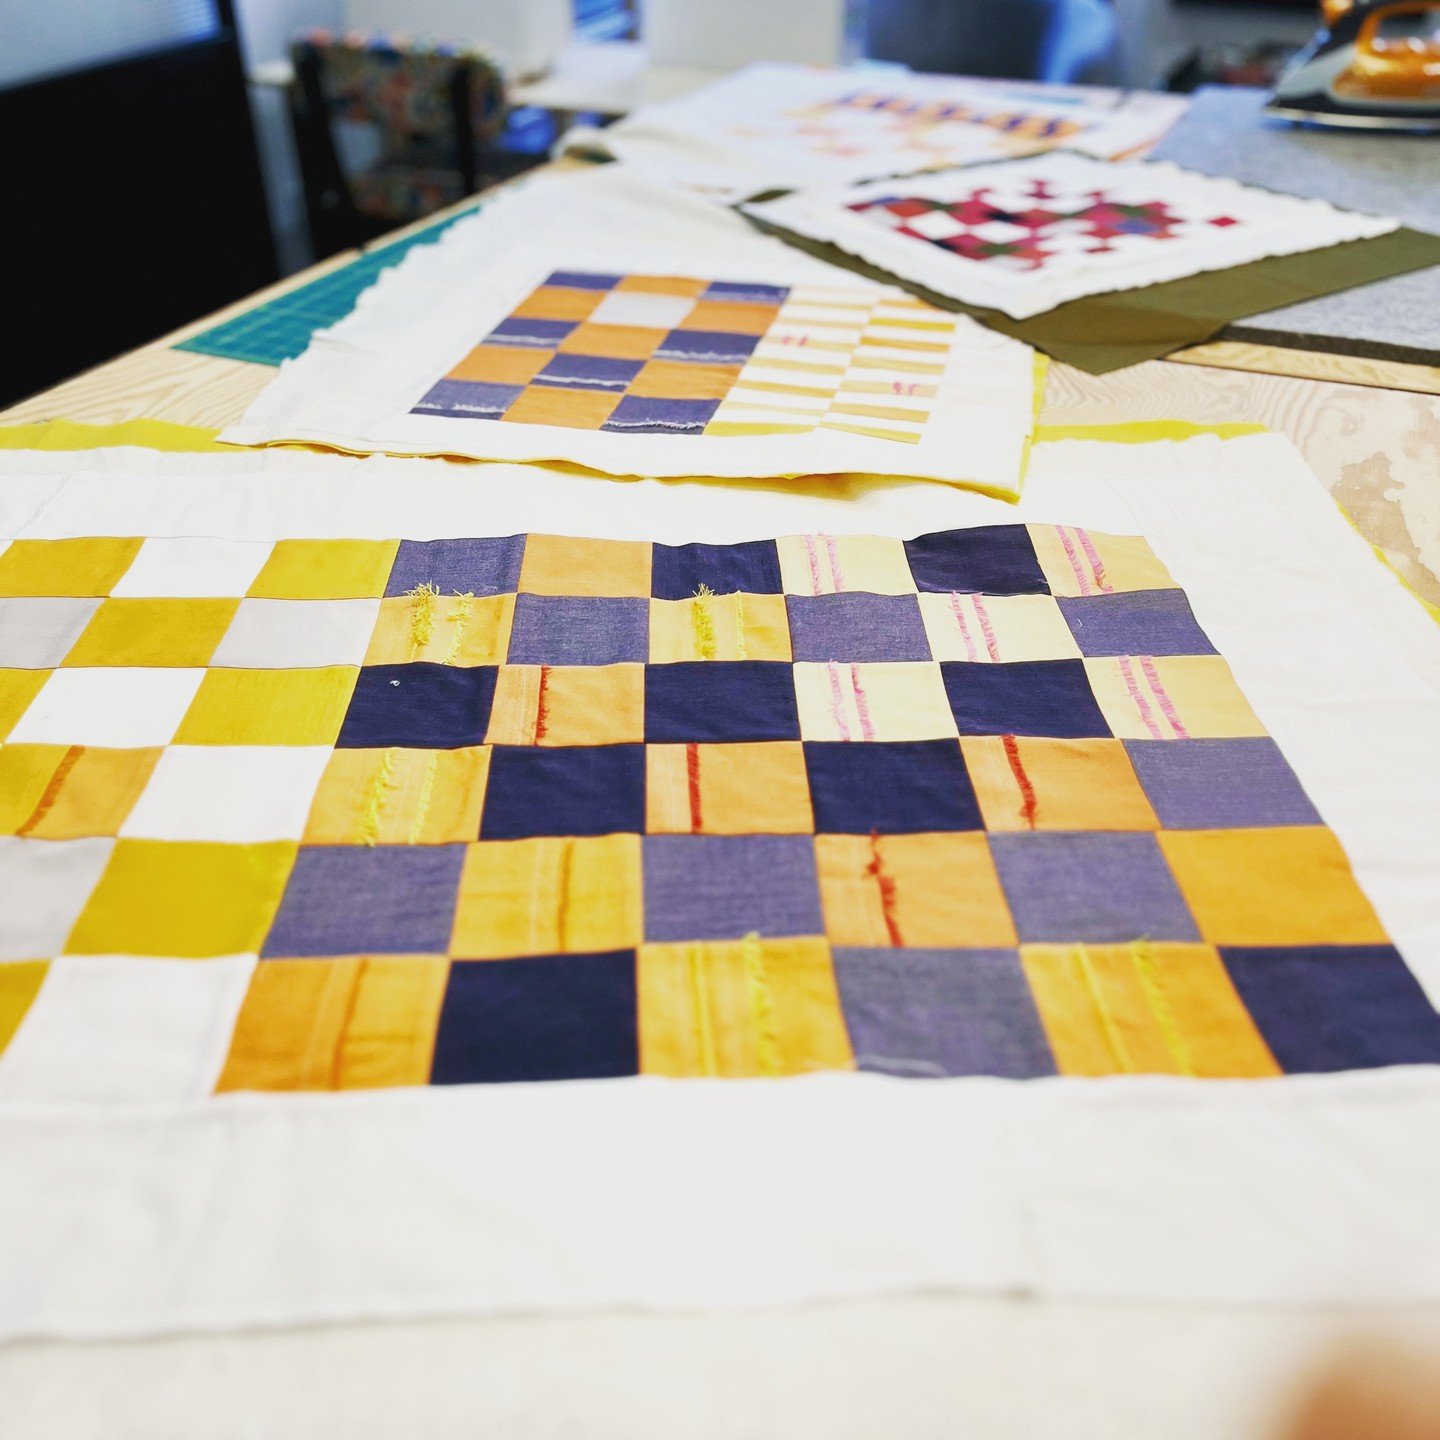 Here are various small and medium pieces basted and ready for handquilting.

Follow me to see the complete collection come alive!

#workinginaseries
#ModernQuilting
#ModernQuilts
#ninepatch
#modernquiltshow
#quiltingmagazine
#minimalistquilt
#quiltin